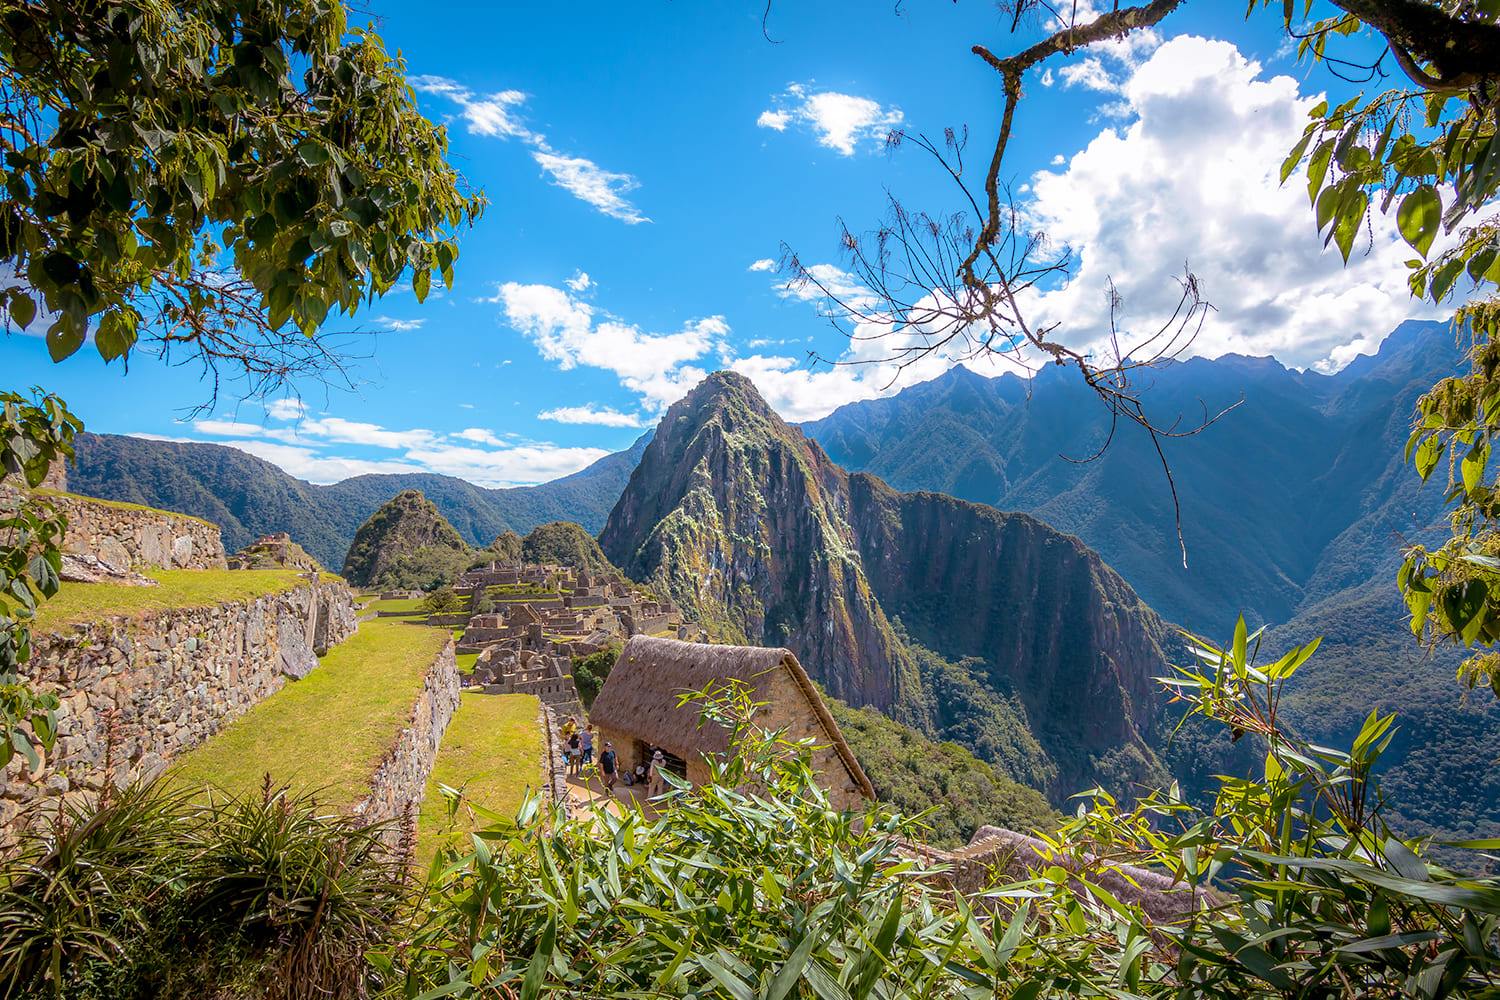 QUESTIONS ON PAYMENT AND RESERVATION OF THE INCA TRAIL HIKE TO MACHU PICCHU